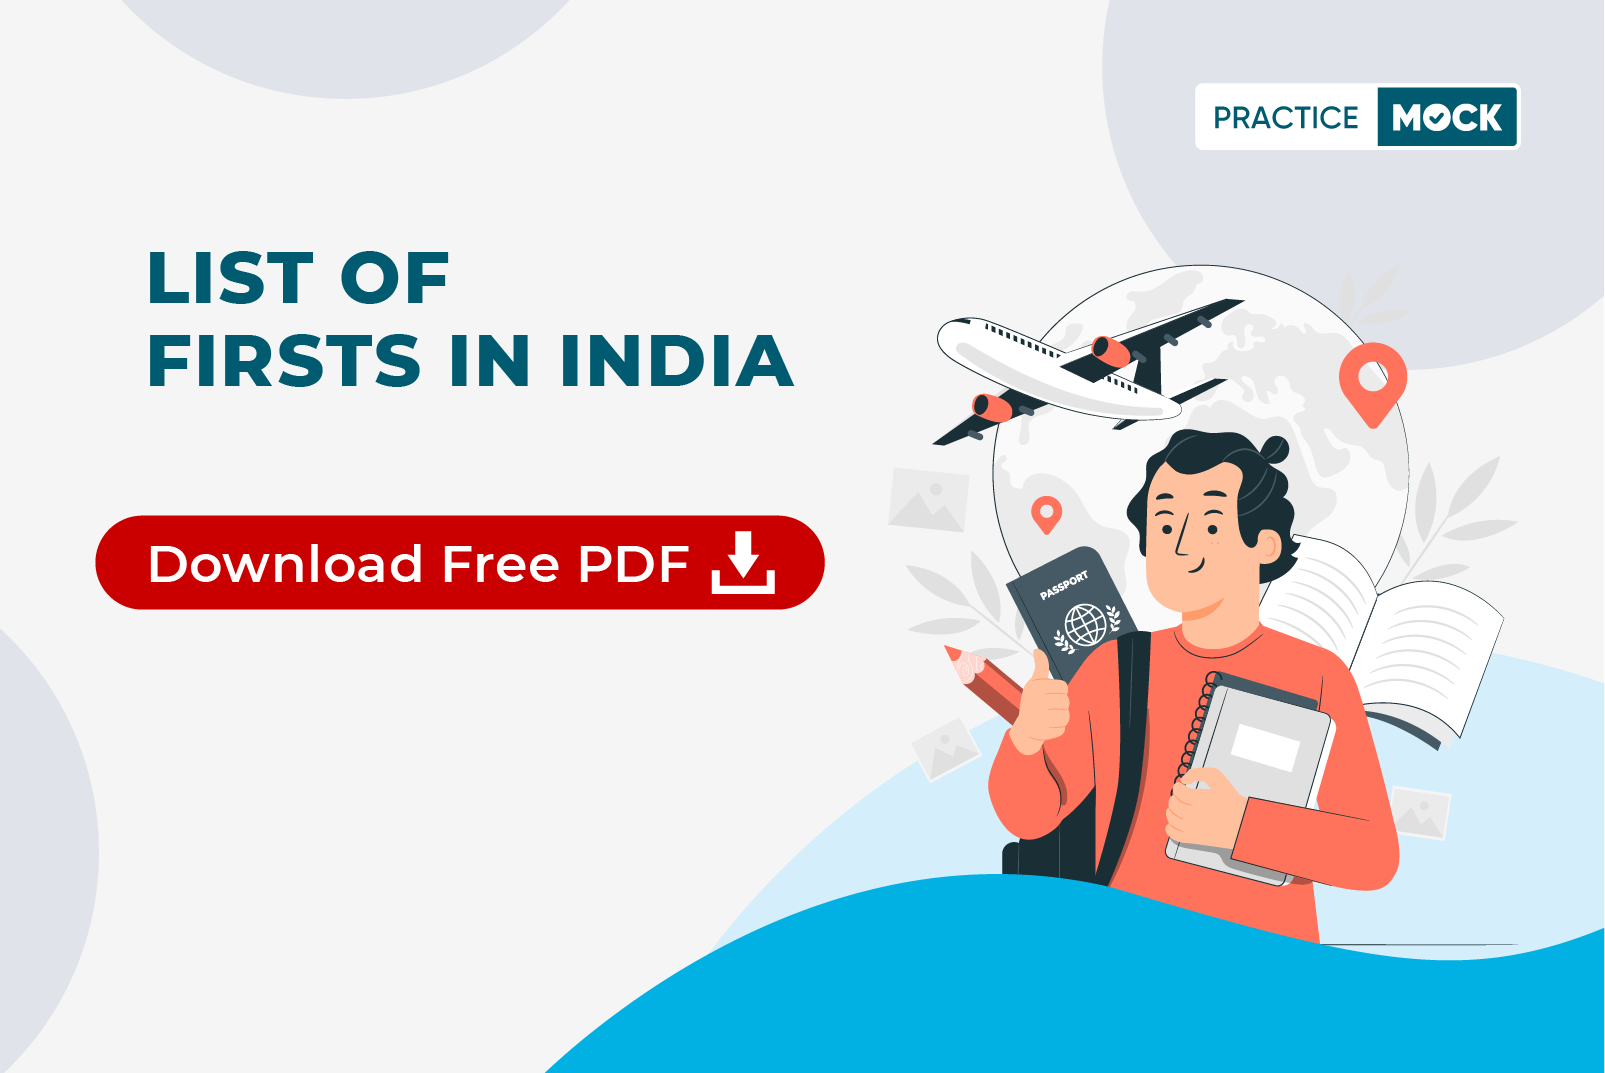 List of Firsts in India- Download Free PDF